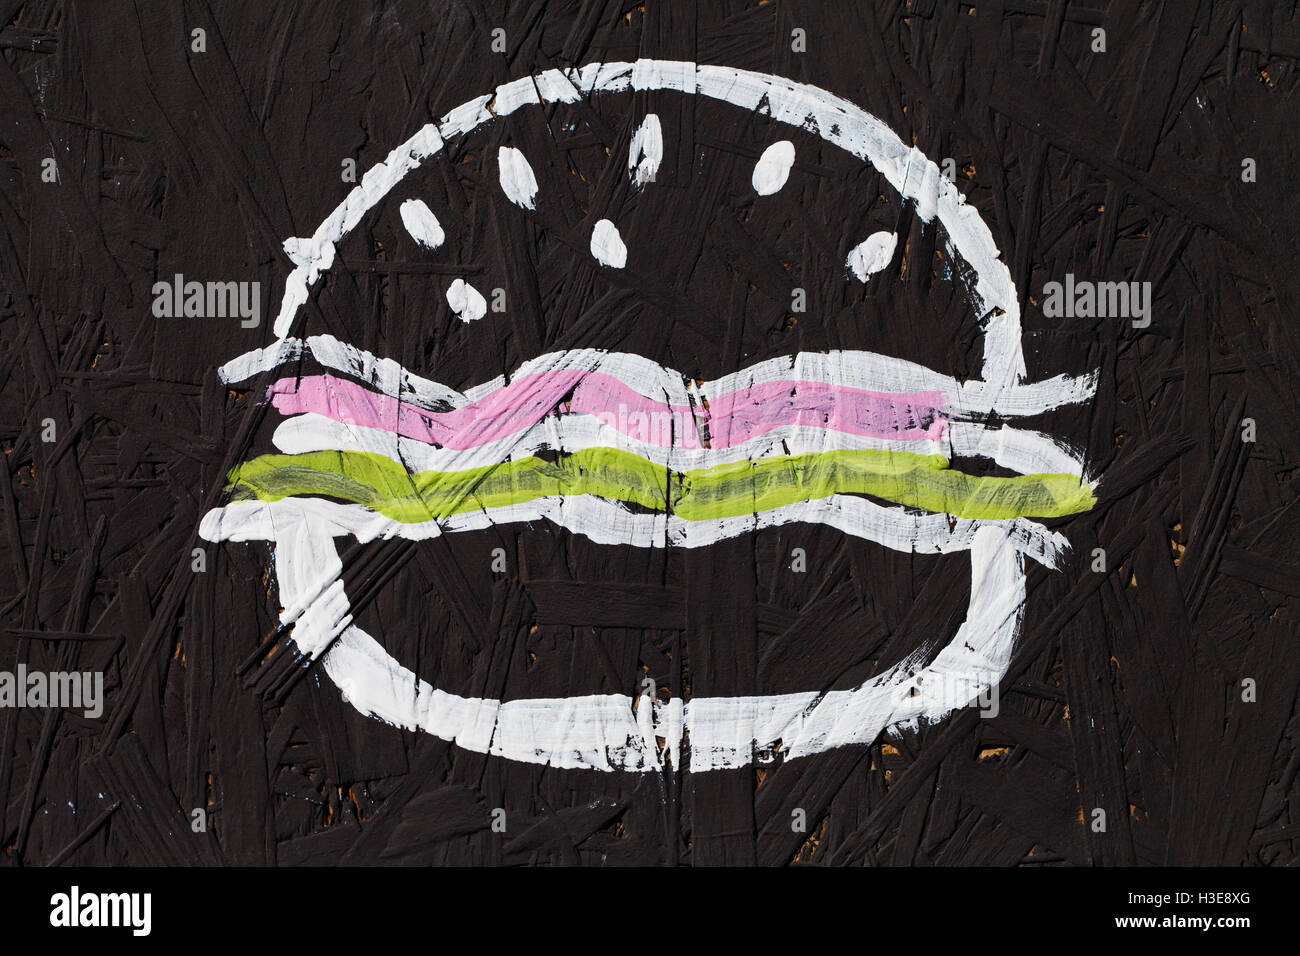 a hamburger and cheeseburger, abstract pattern on a black background Stock Photo